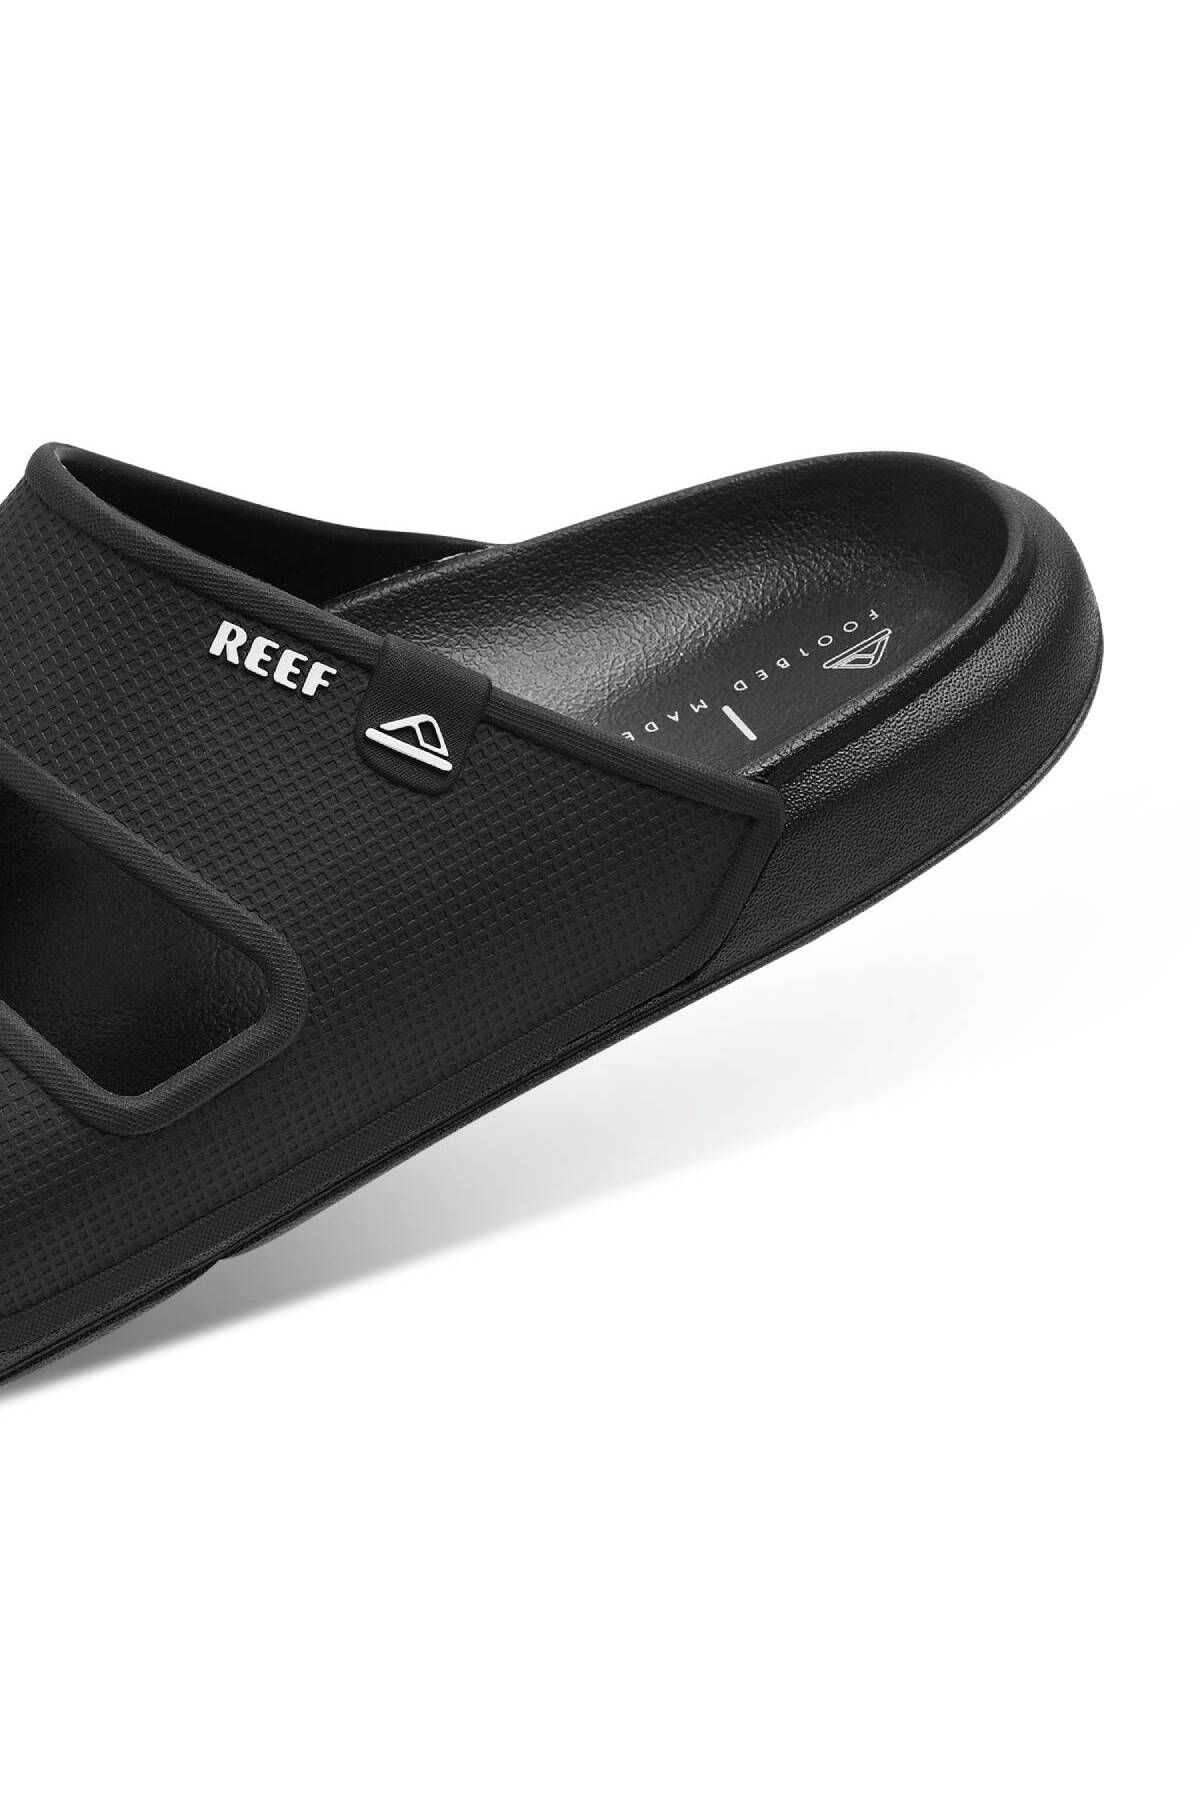 Reef OASIS DOUBLE UP - BLACK